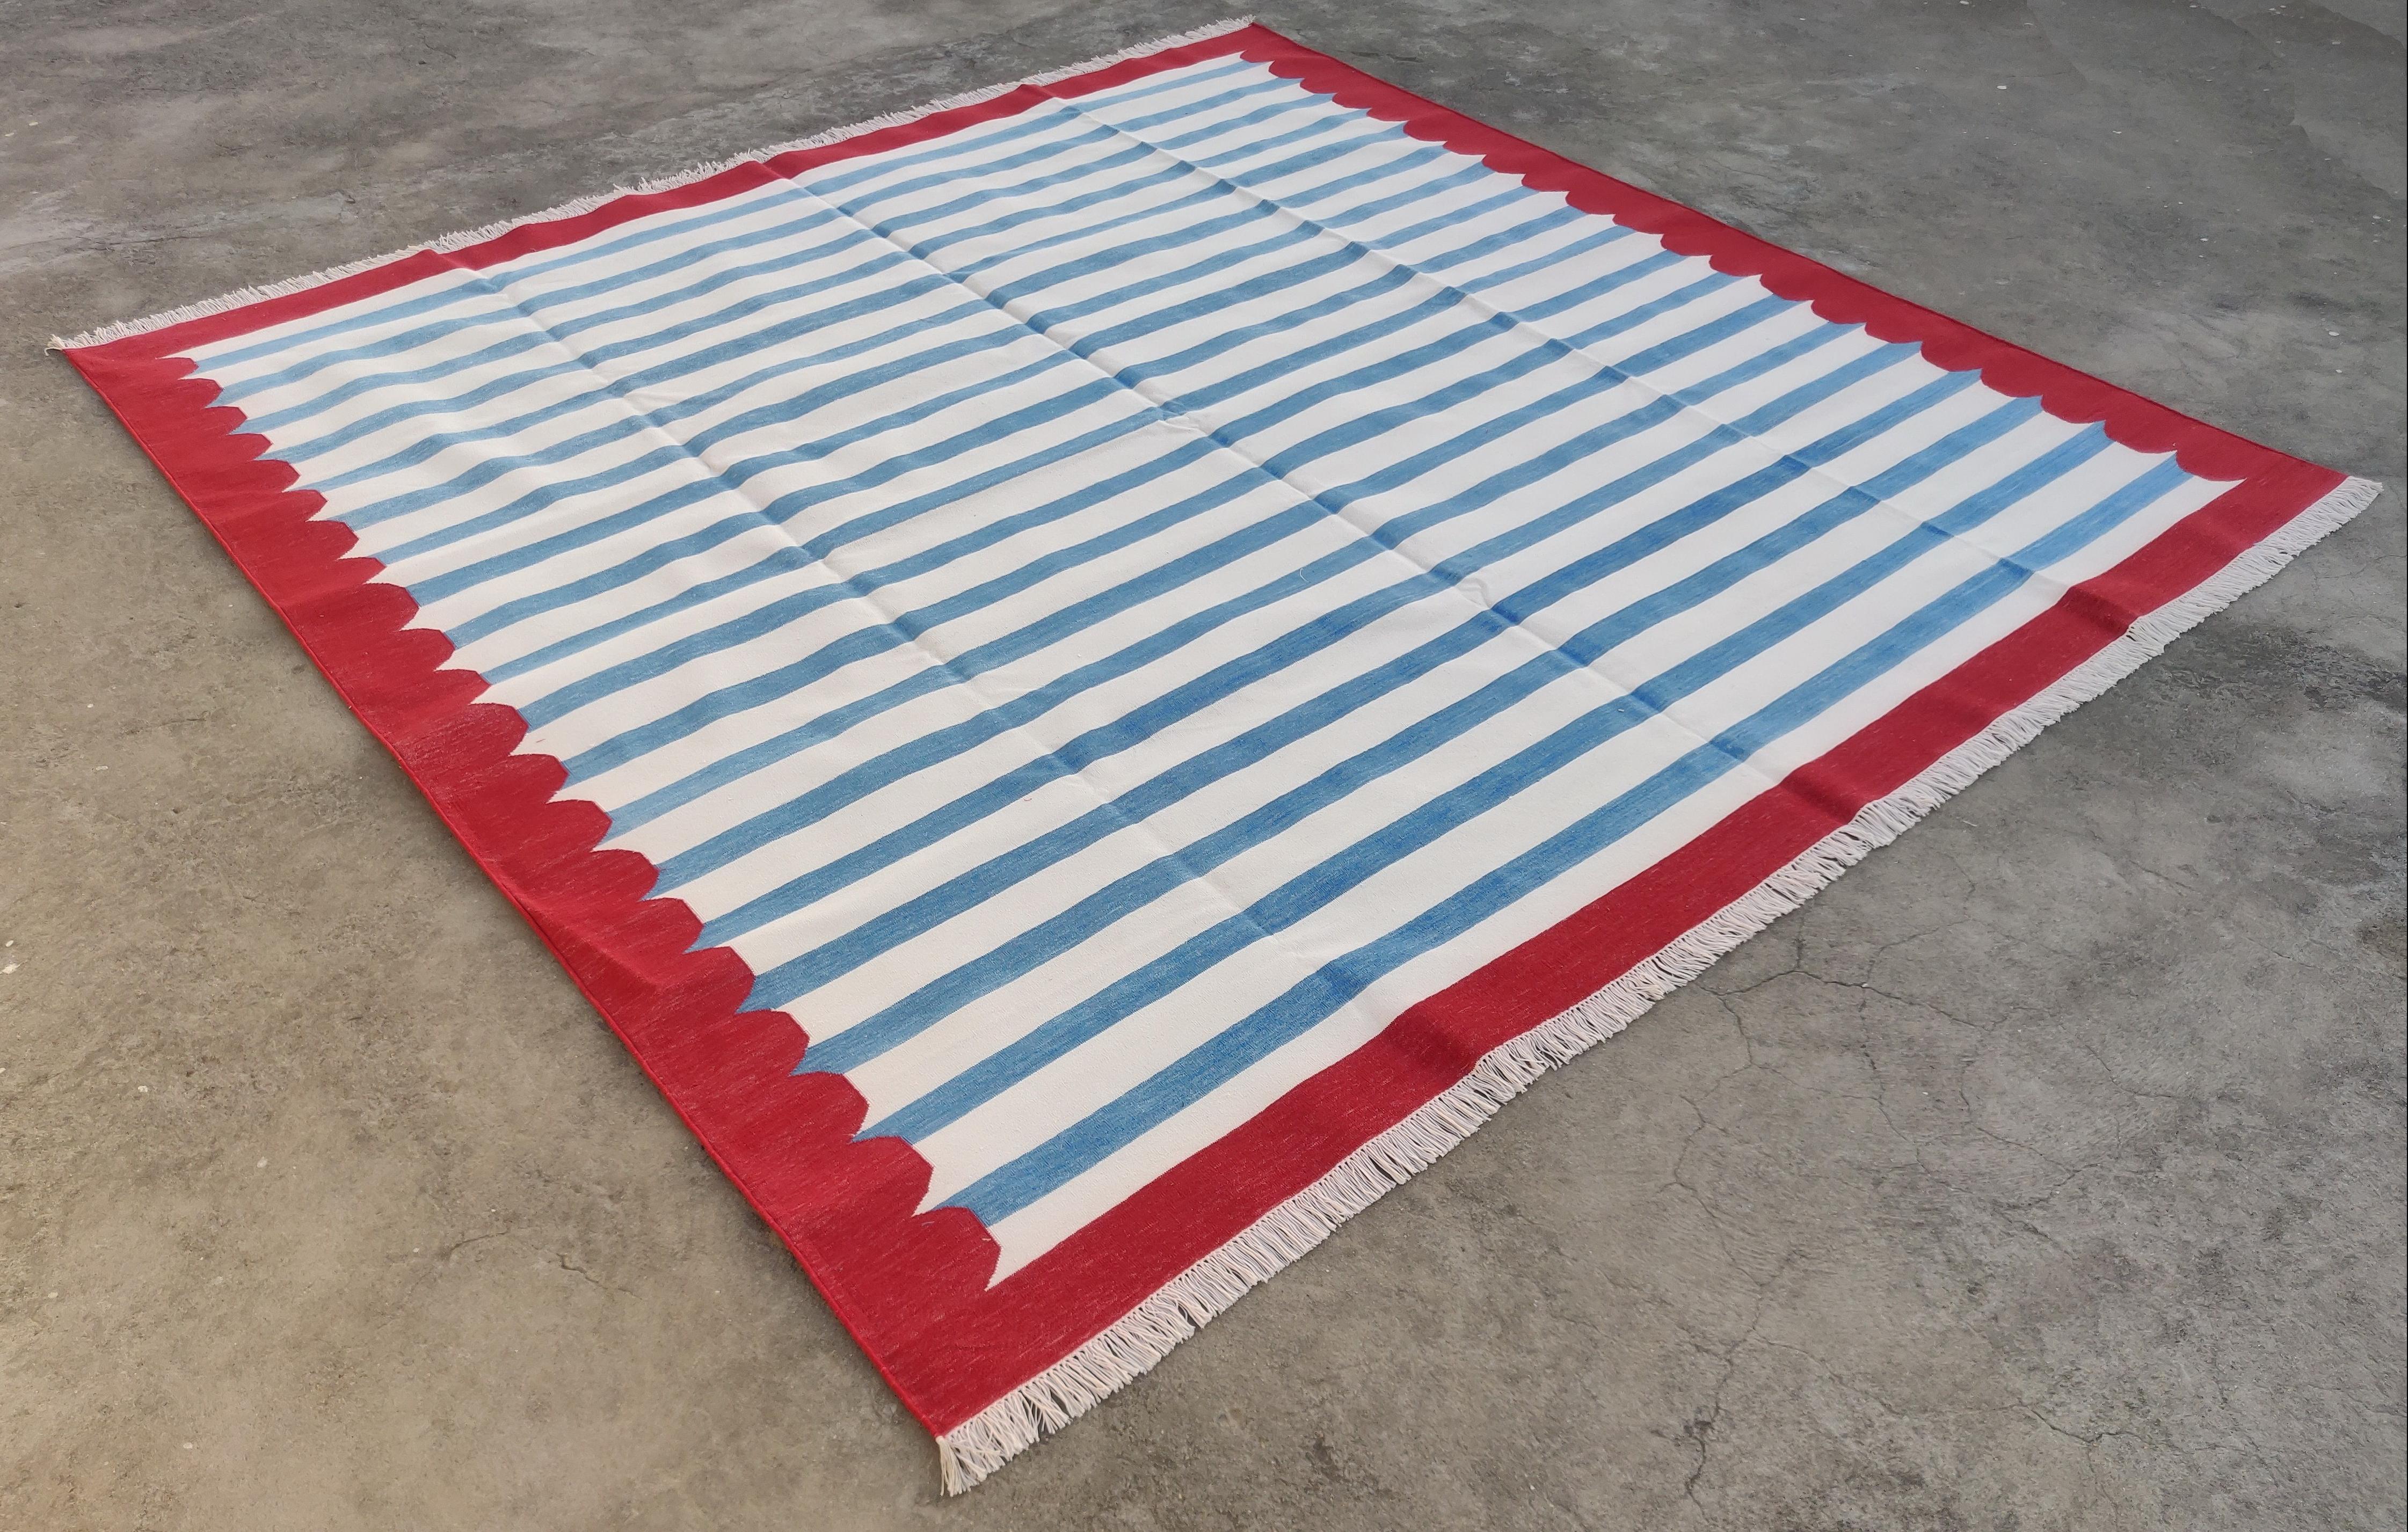 Cotton Vegetable Dyed Blue, White And Red Striped Indian Dhurrie Rug-8'x10' 
These special flat-weave dhurries are hand-woven with 15 ply 100% cotton yarn. Due to the special manufacturing techniques used to create our rugs, the size and color of